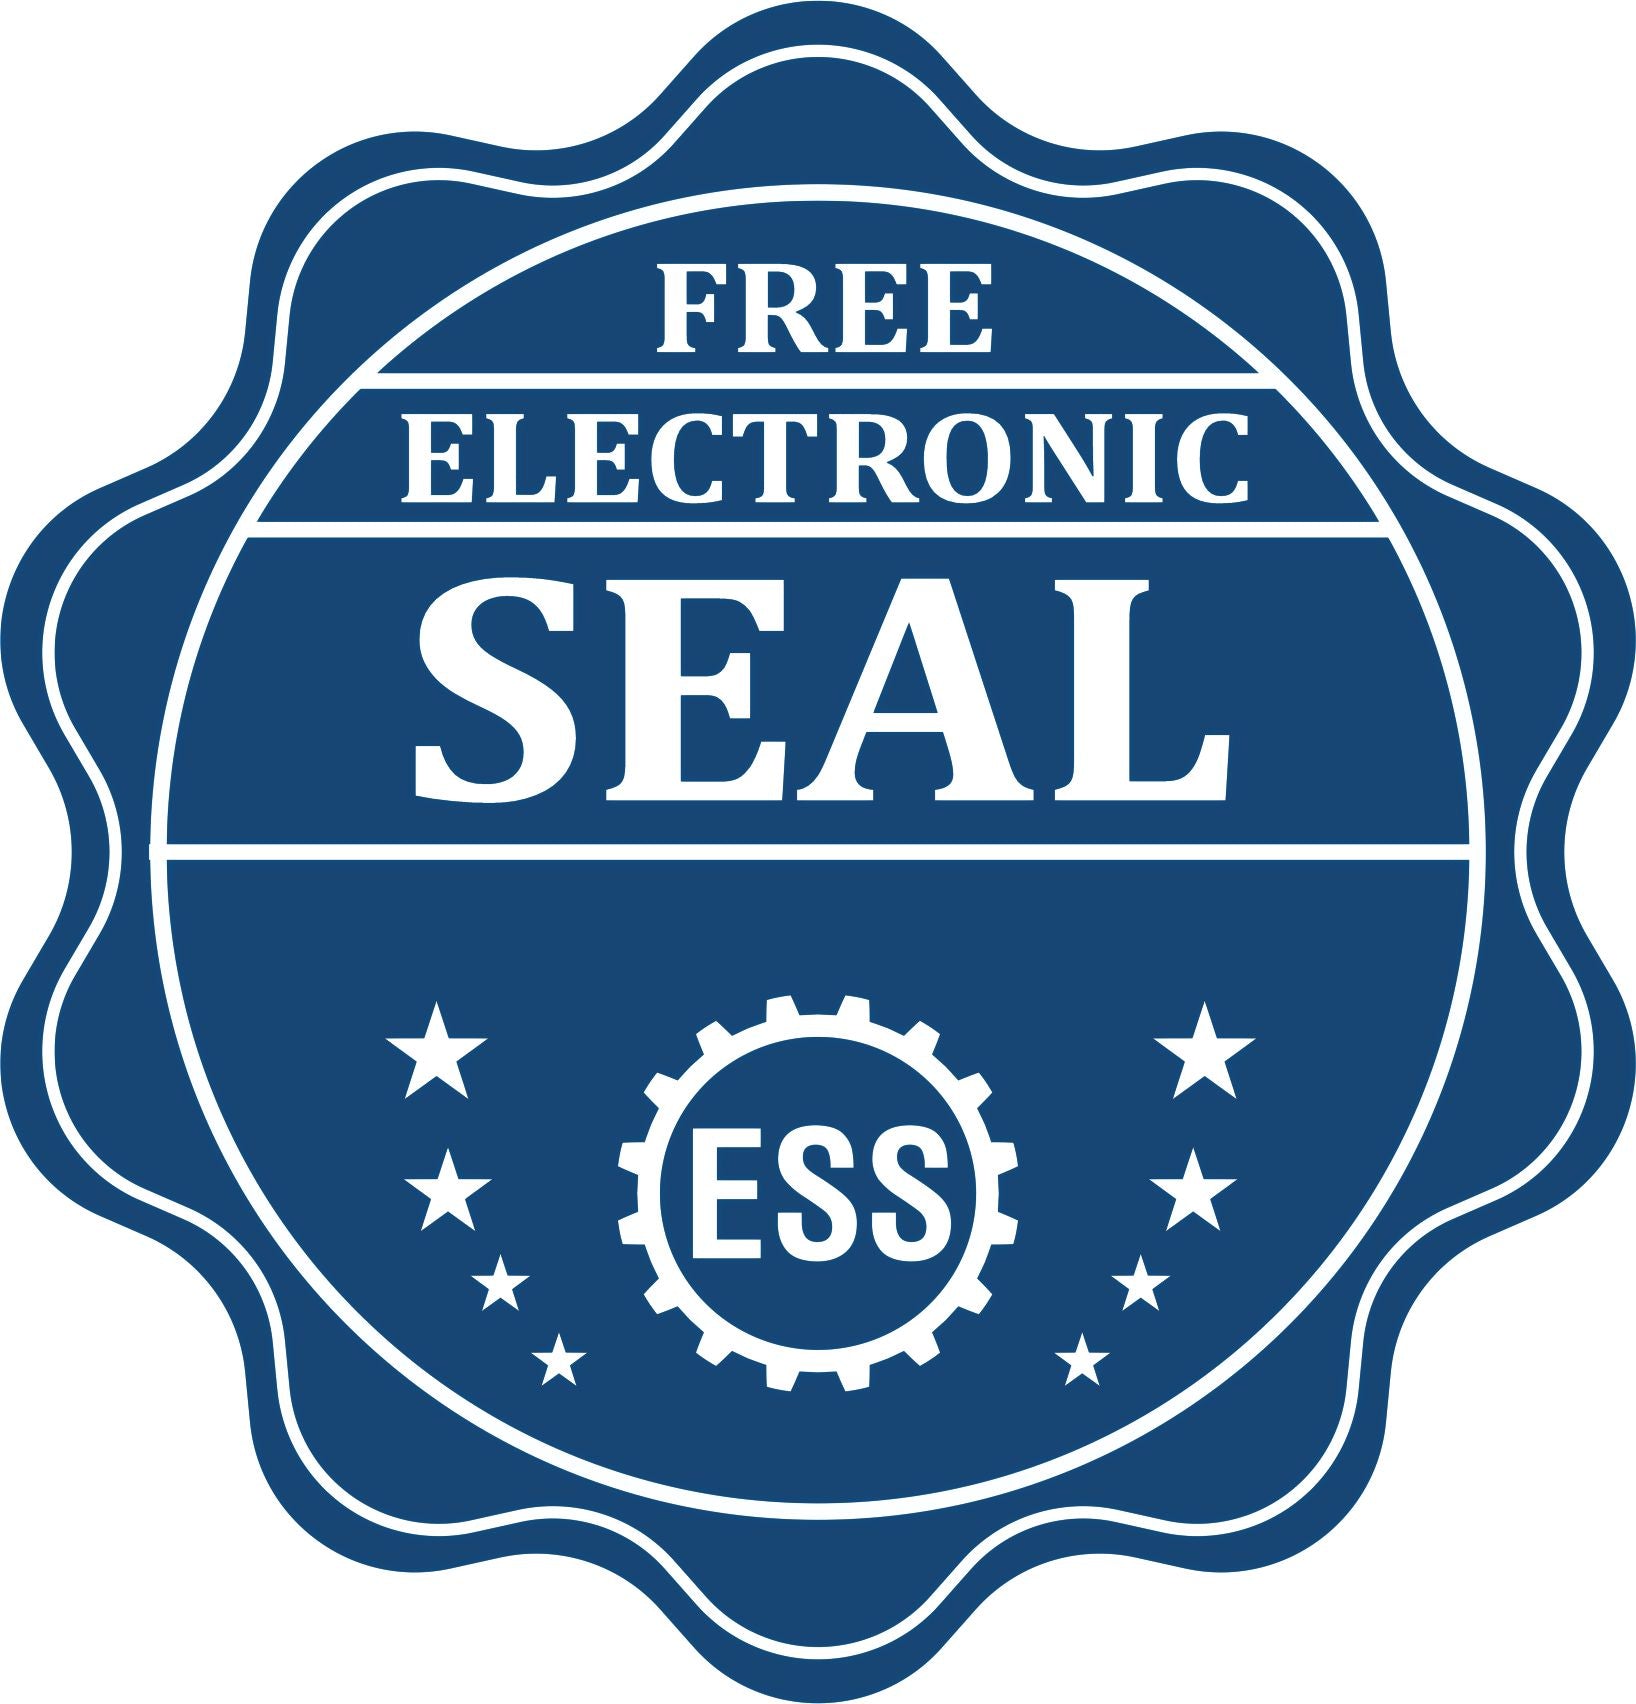 A badge showing a free electronic seal for the Slim Pre-Inked South Dakota Architect Seal Stamp with stars and the ESS gear on the emblem.